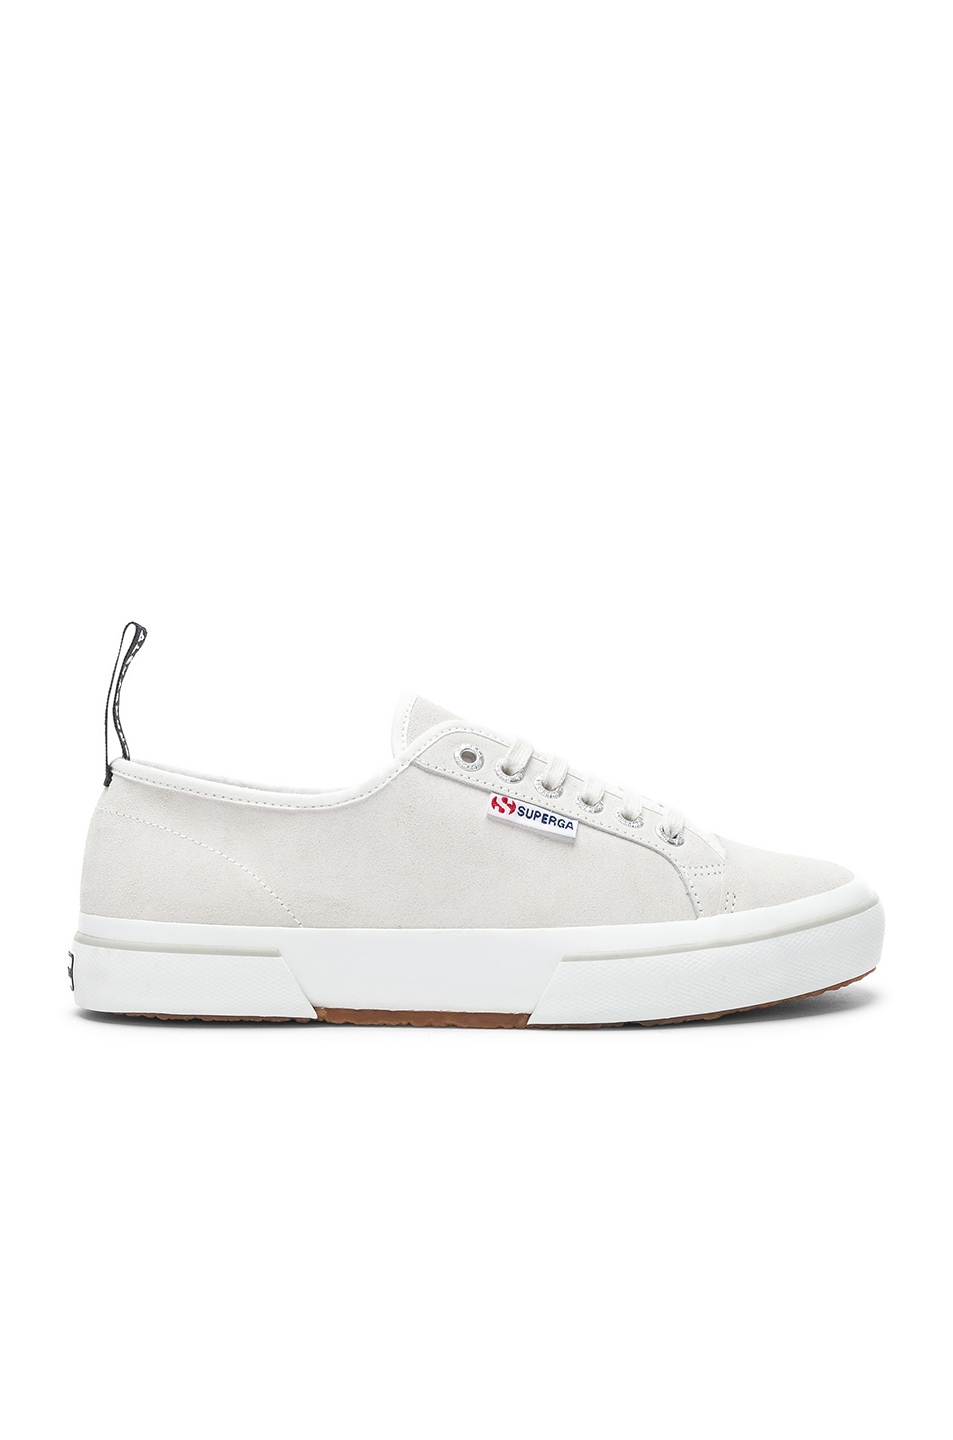 Image 1 of ALEXACHUNG x Superga Low Top Suede Sneaker in White Cream